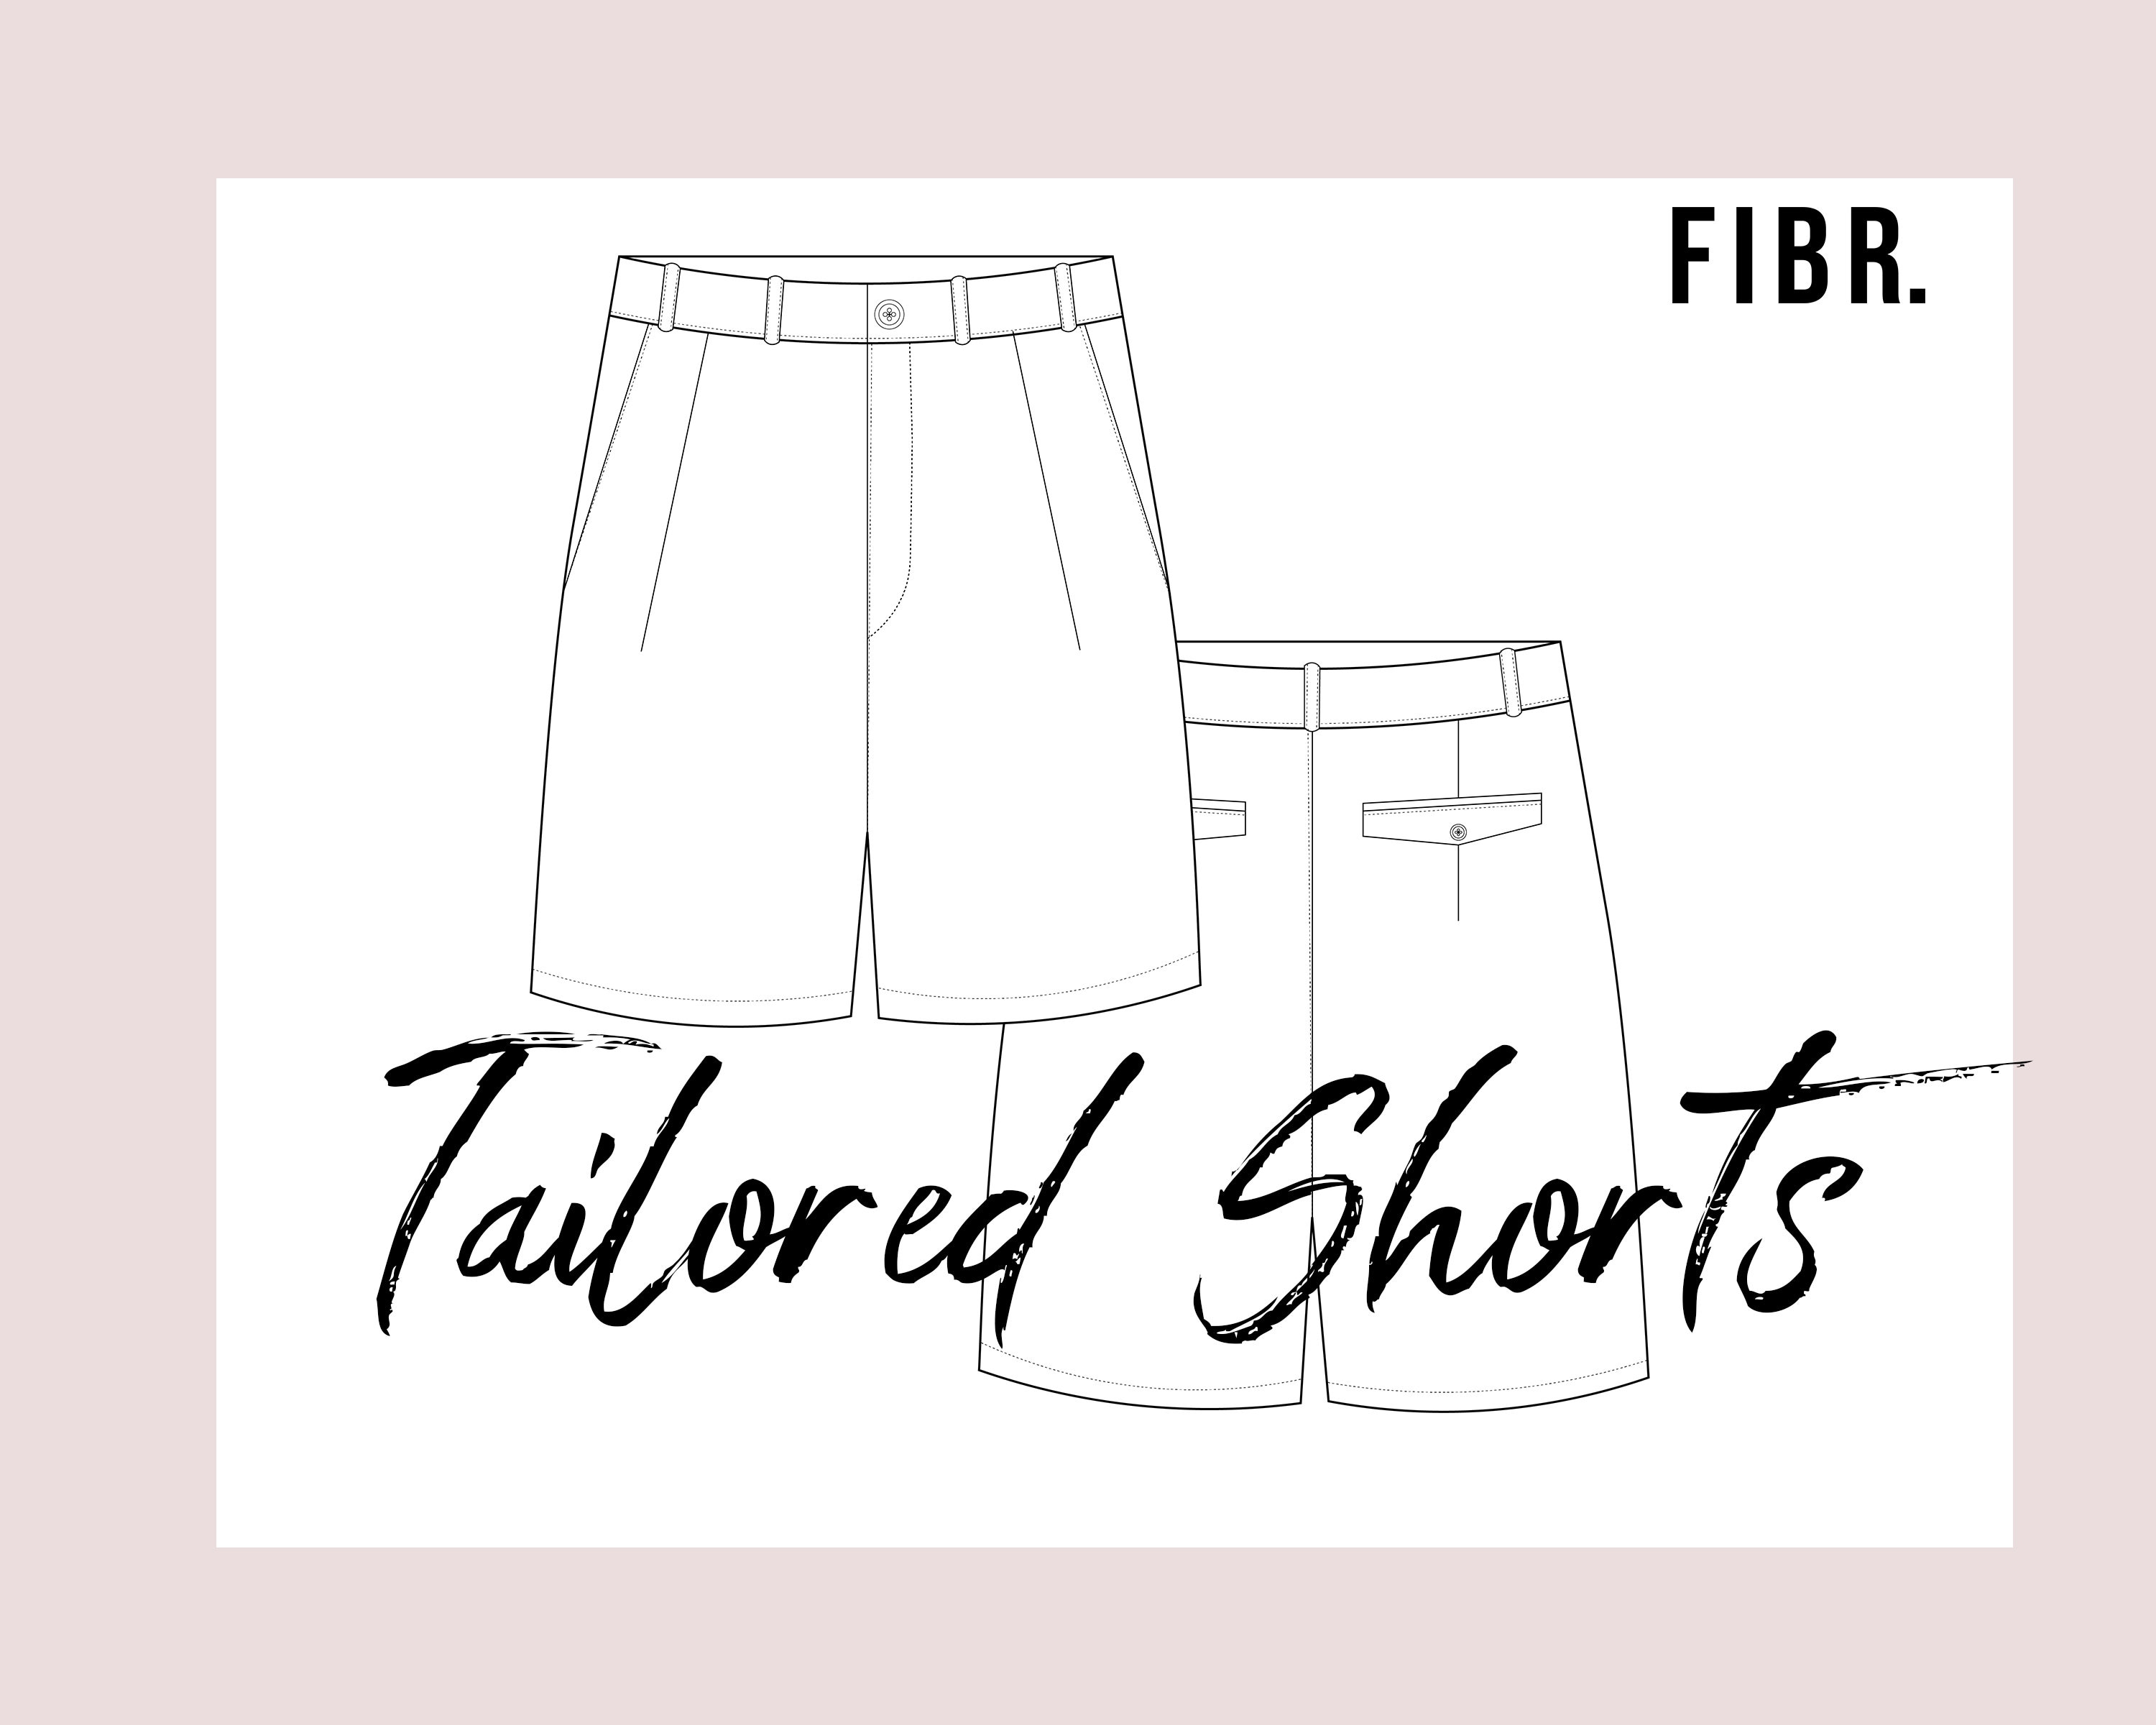 Buy Mens Shorts Fashion Flat Templates / Technical Drawings / Fashion CAD  Designs for Adobe Illustrator / Fashion Flat Sketch Online in India - Etsy